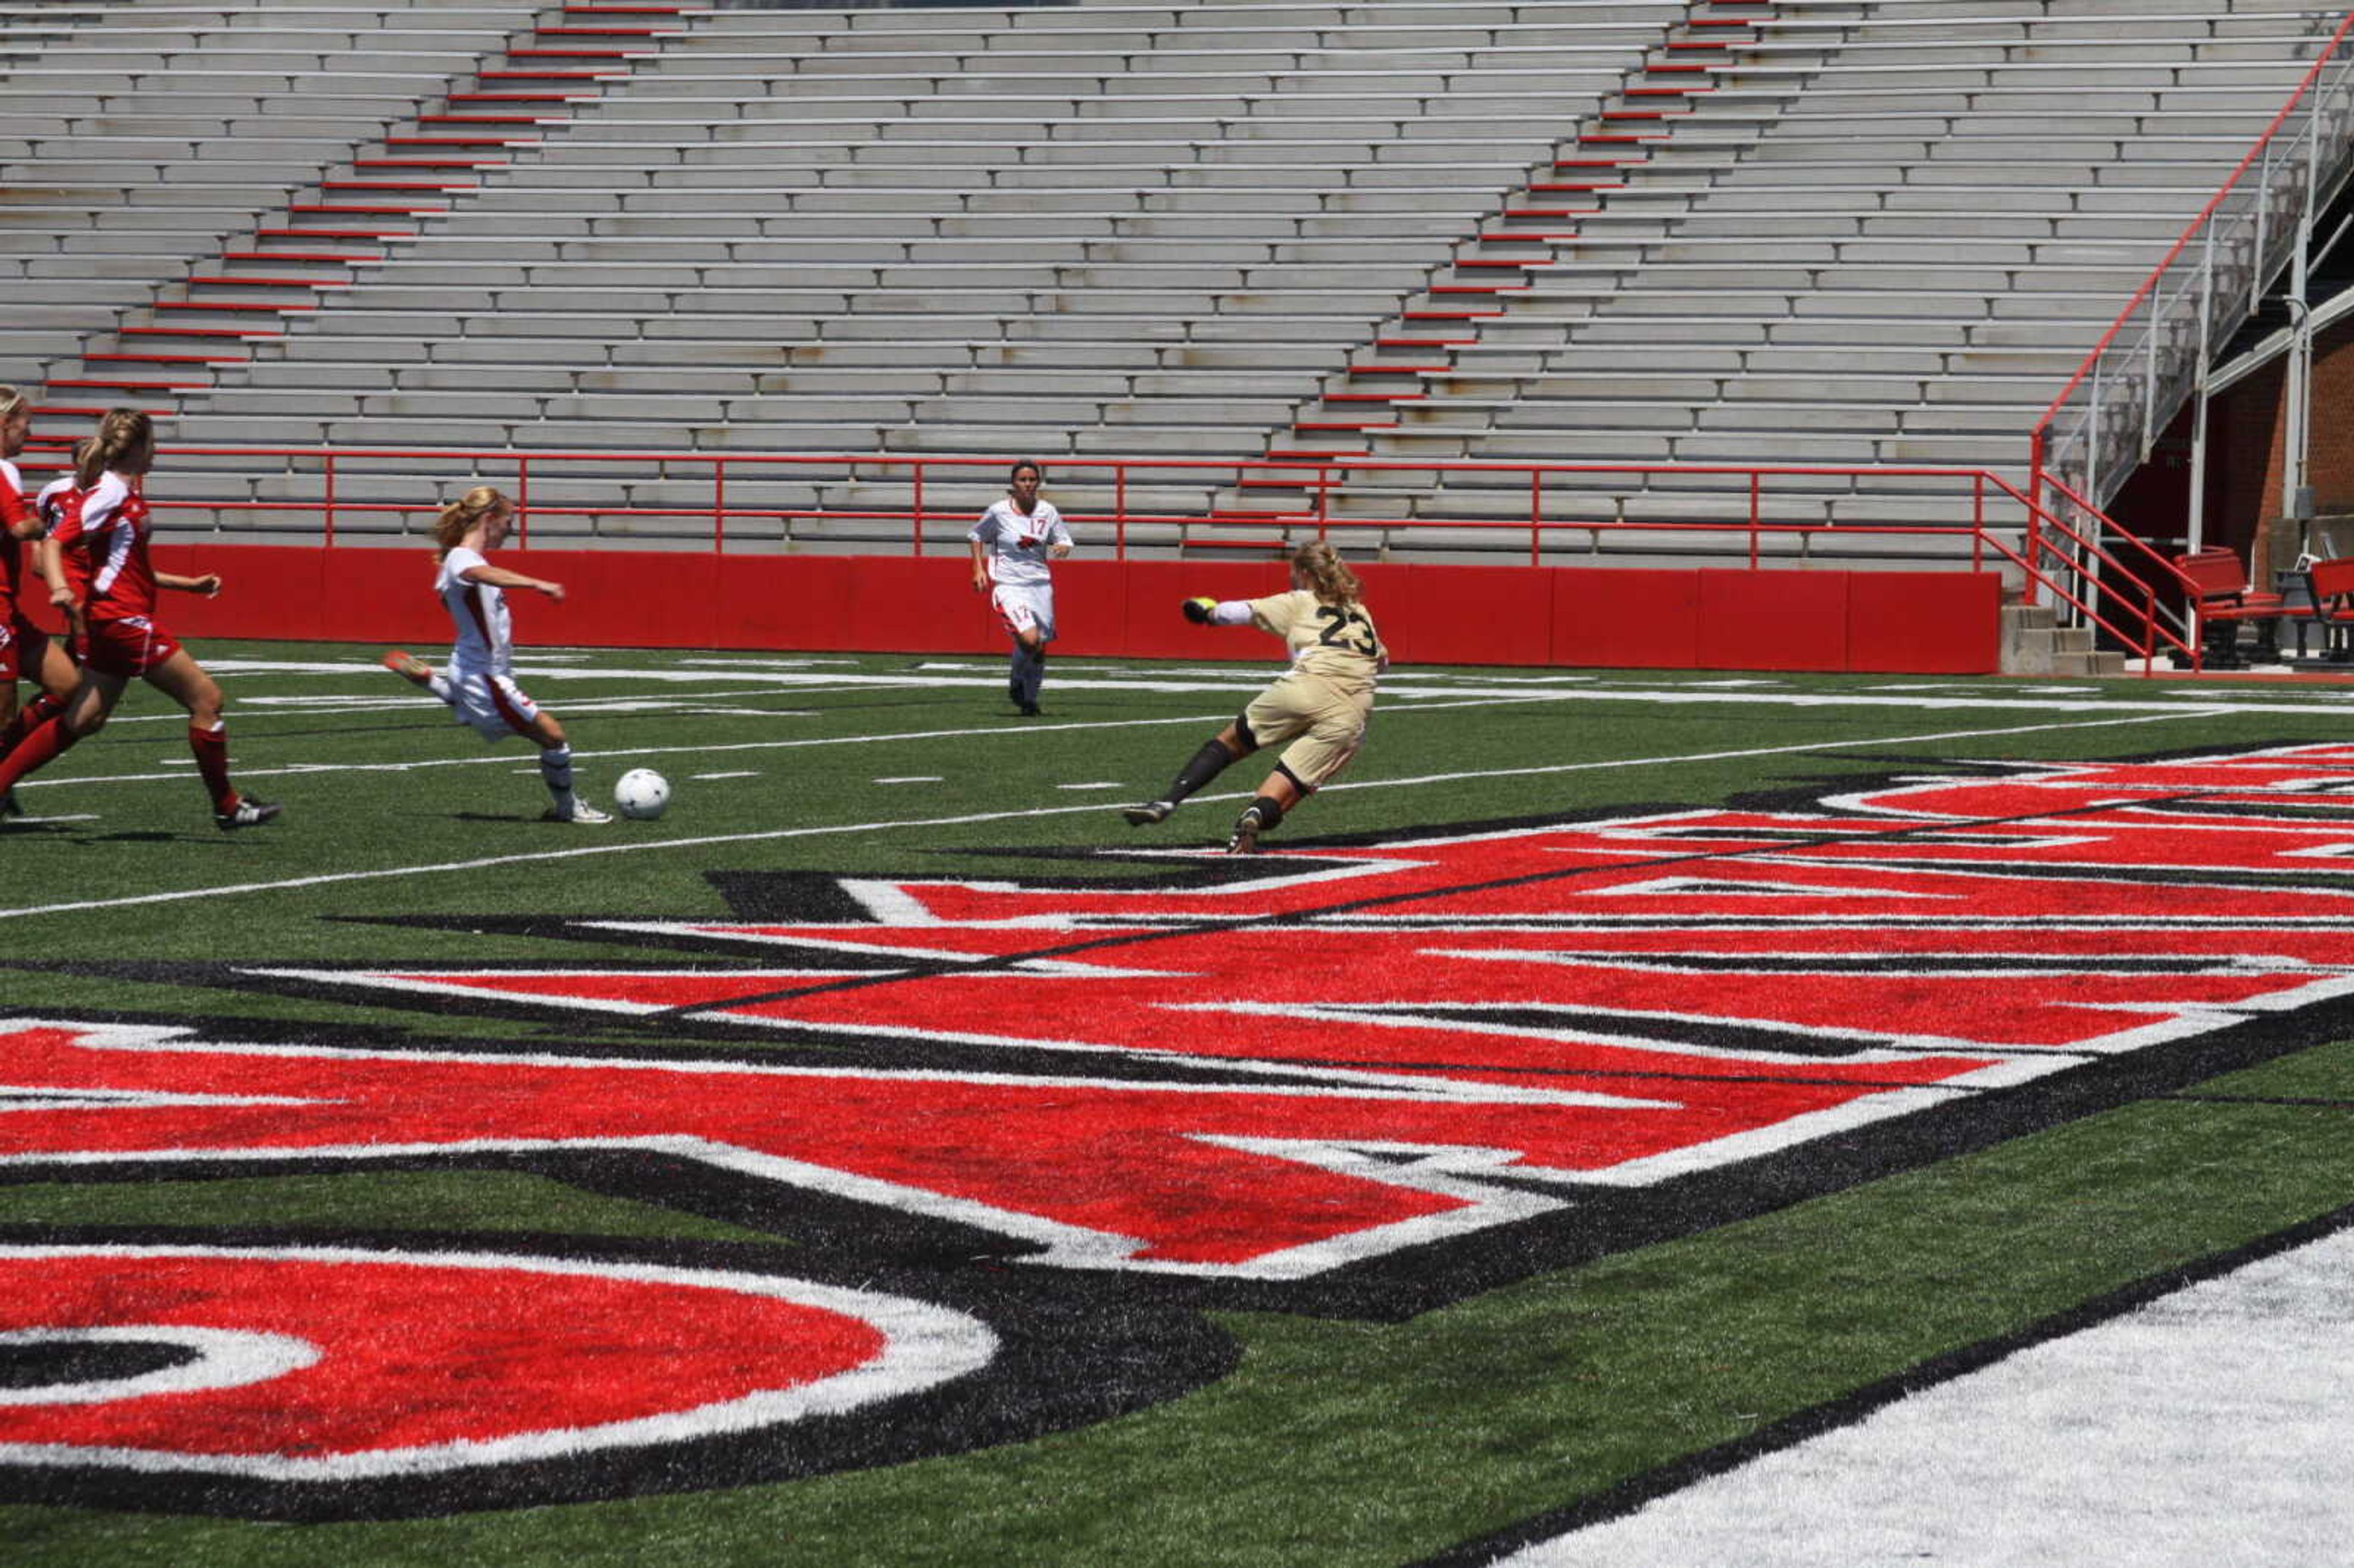 Soccer team shoots for OVC championship